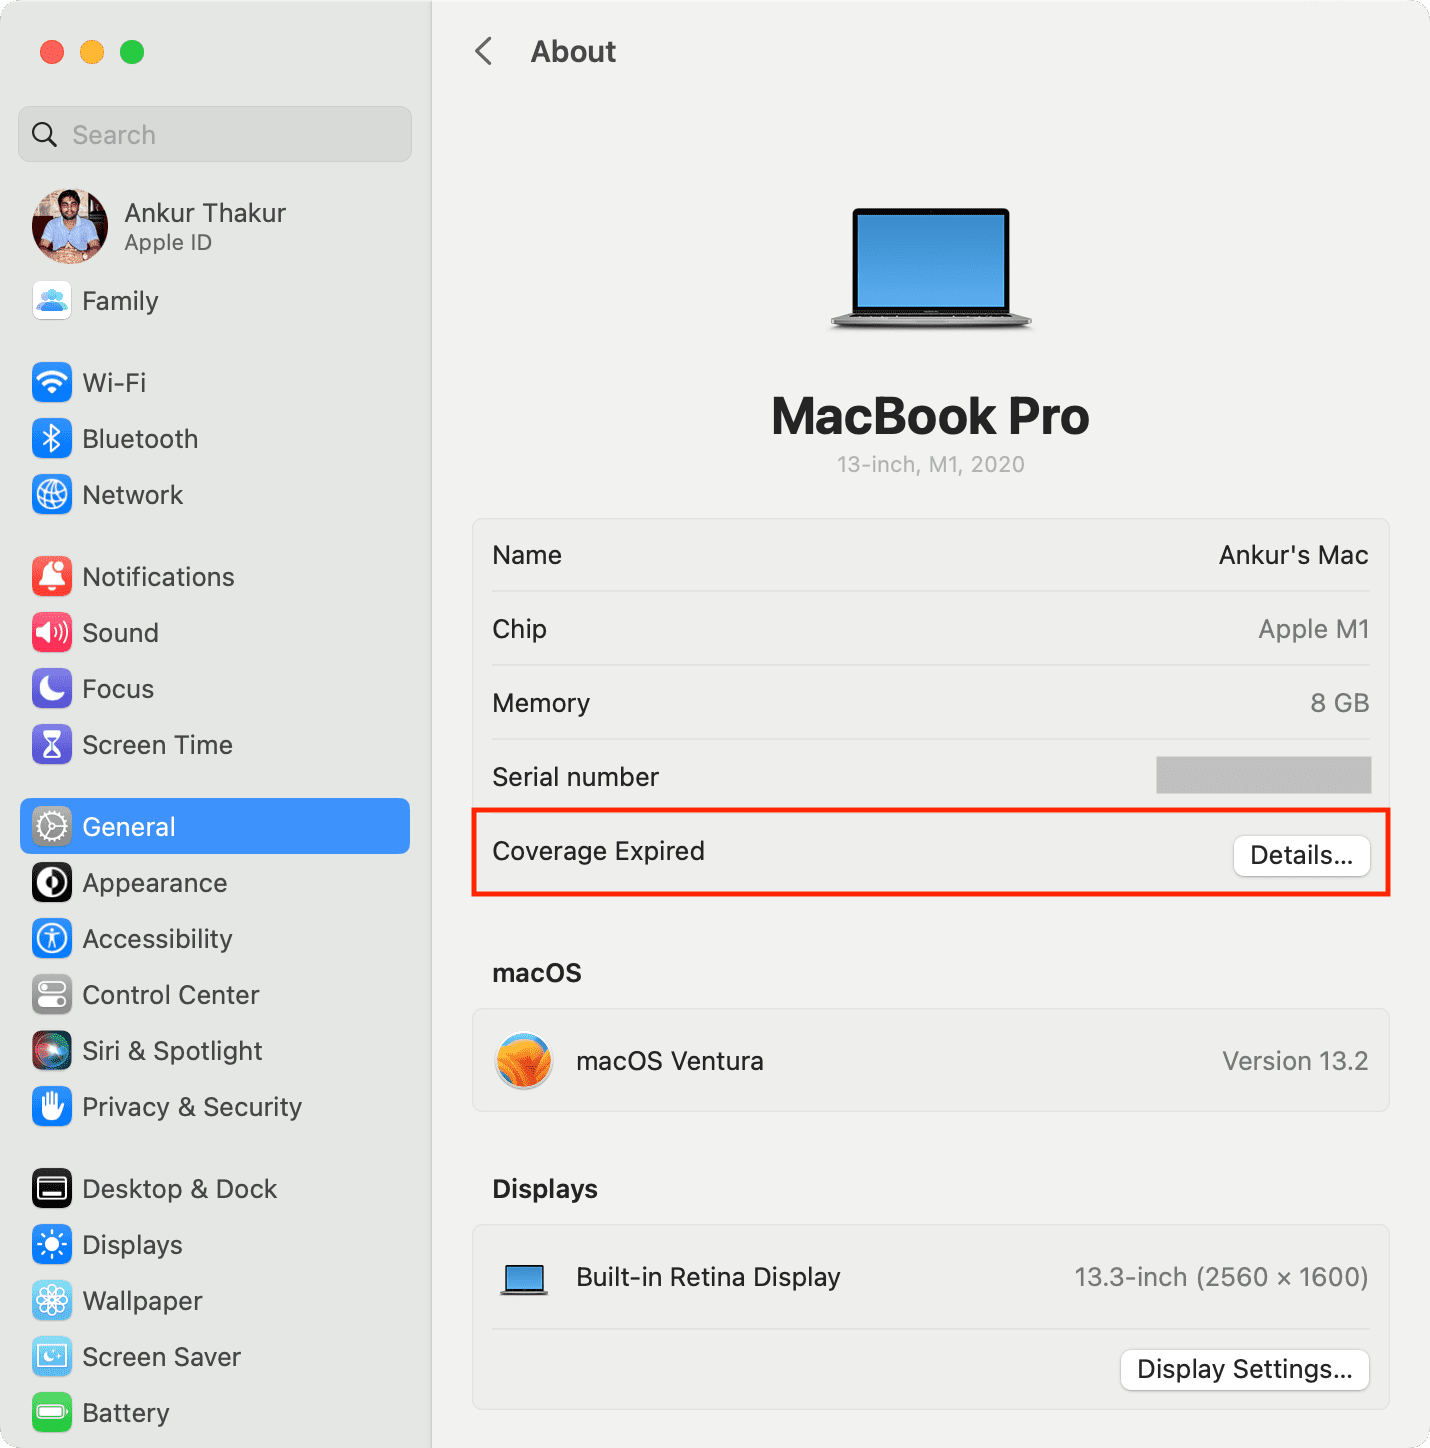 System Settings showing the warranty coverage of a Mac